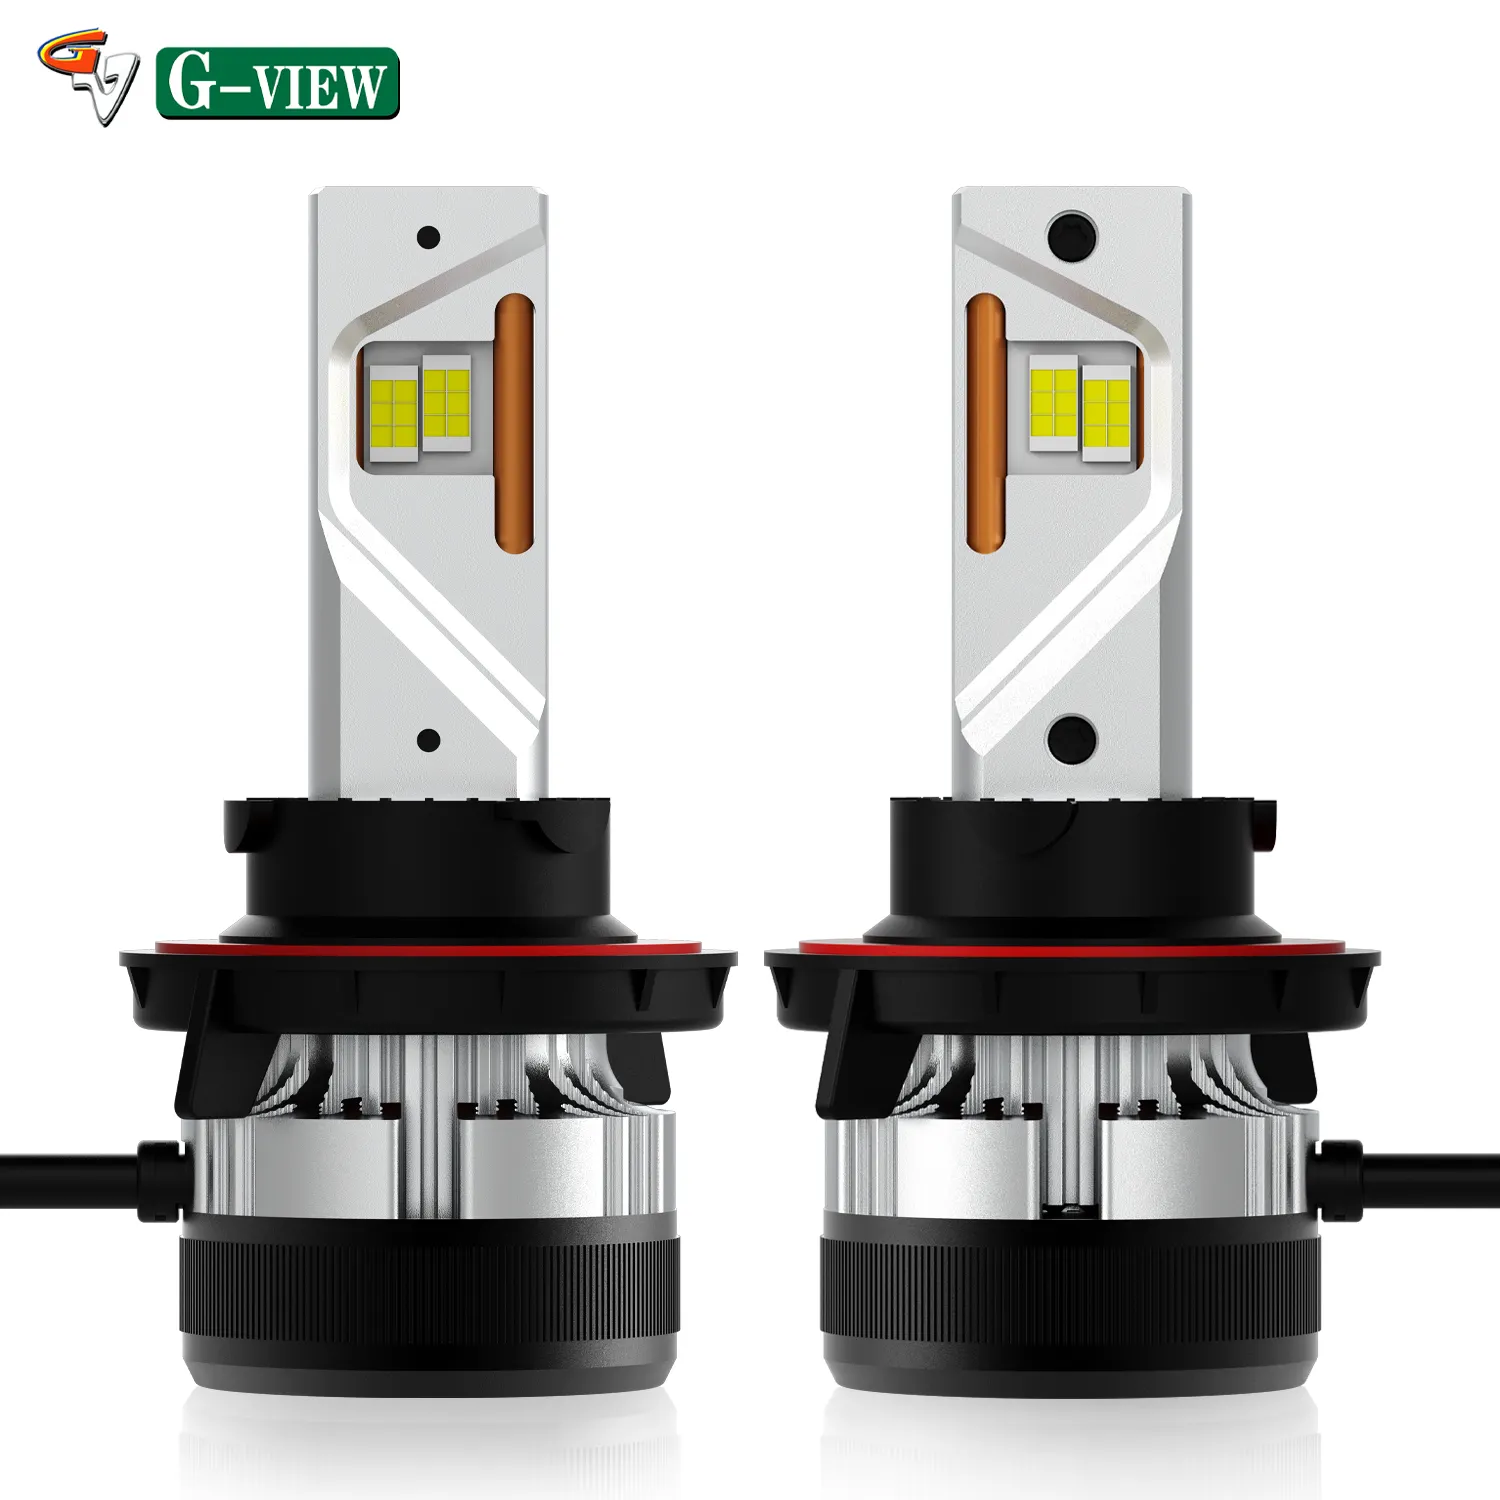 G-View Customized 100W Double Heat Pipe LED Headlight for Car Auto H1 H3 H8 H7 Vacuum Copper Headlight CSP Chip Porsche Models